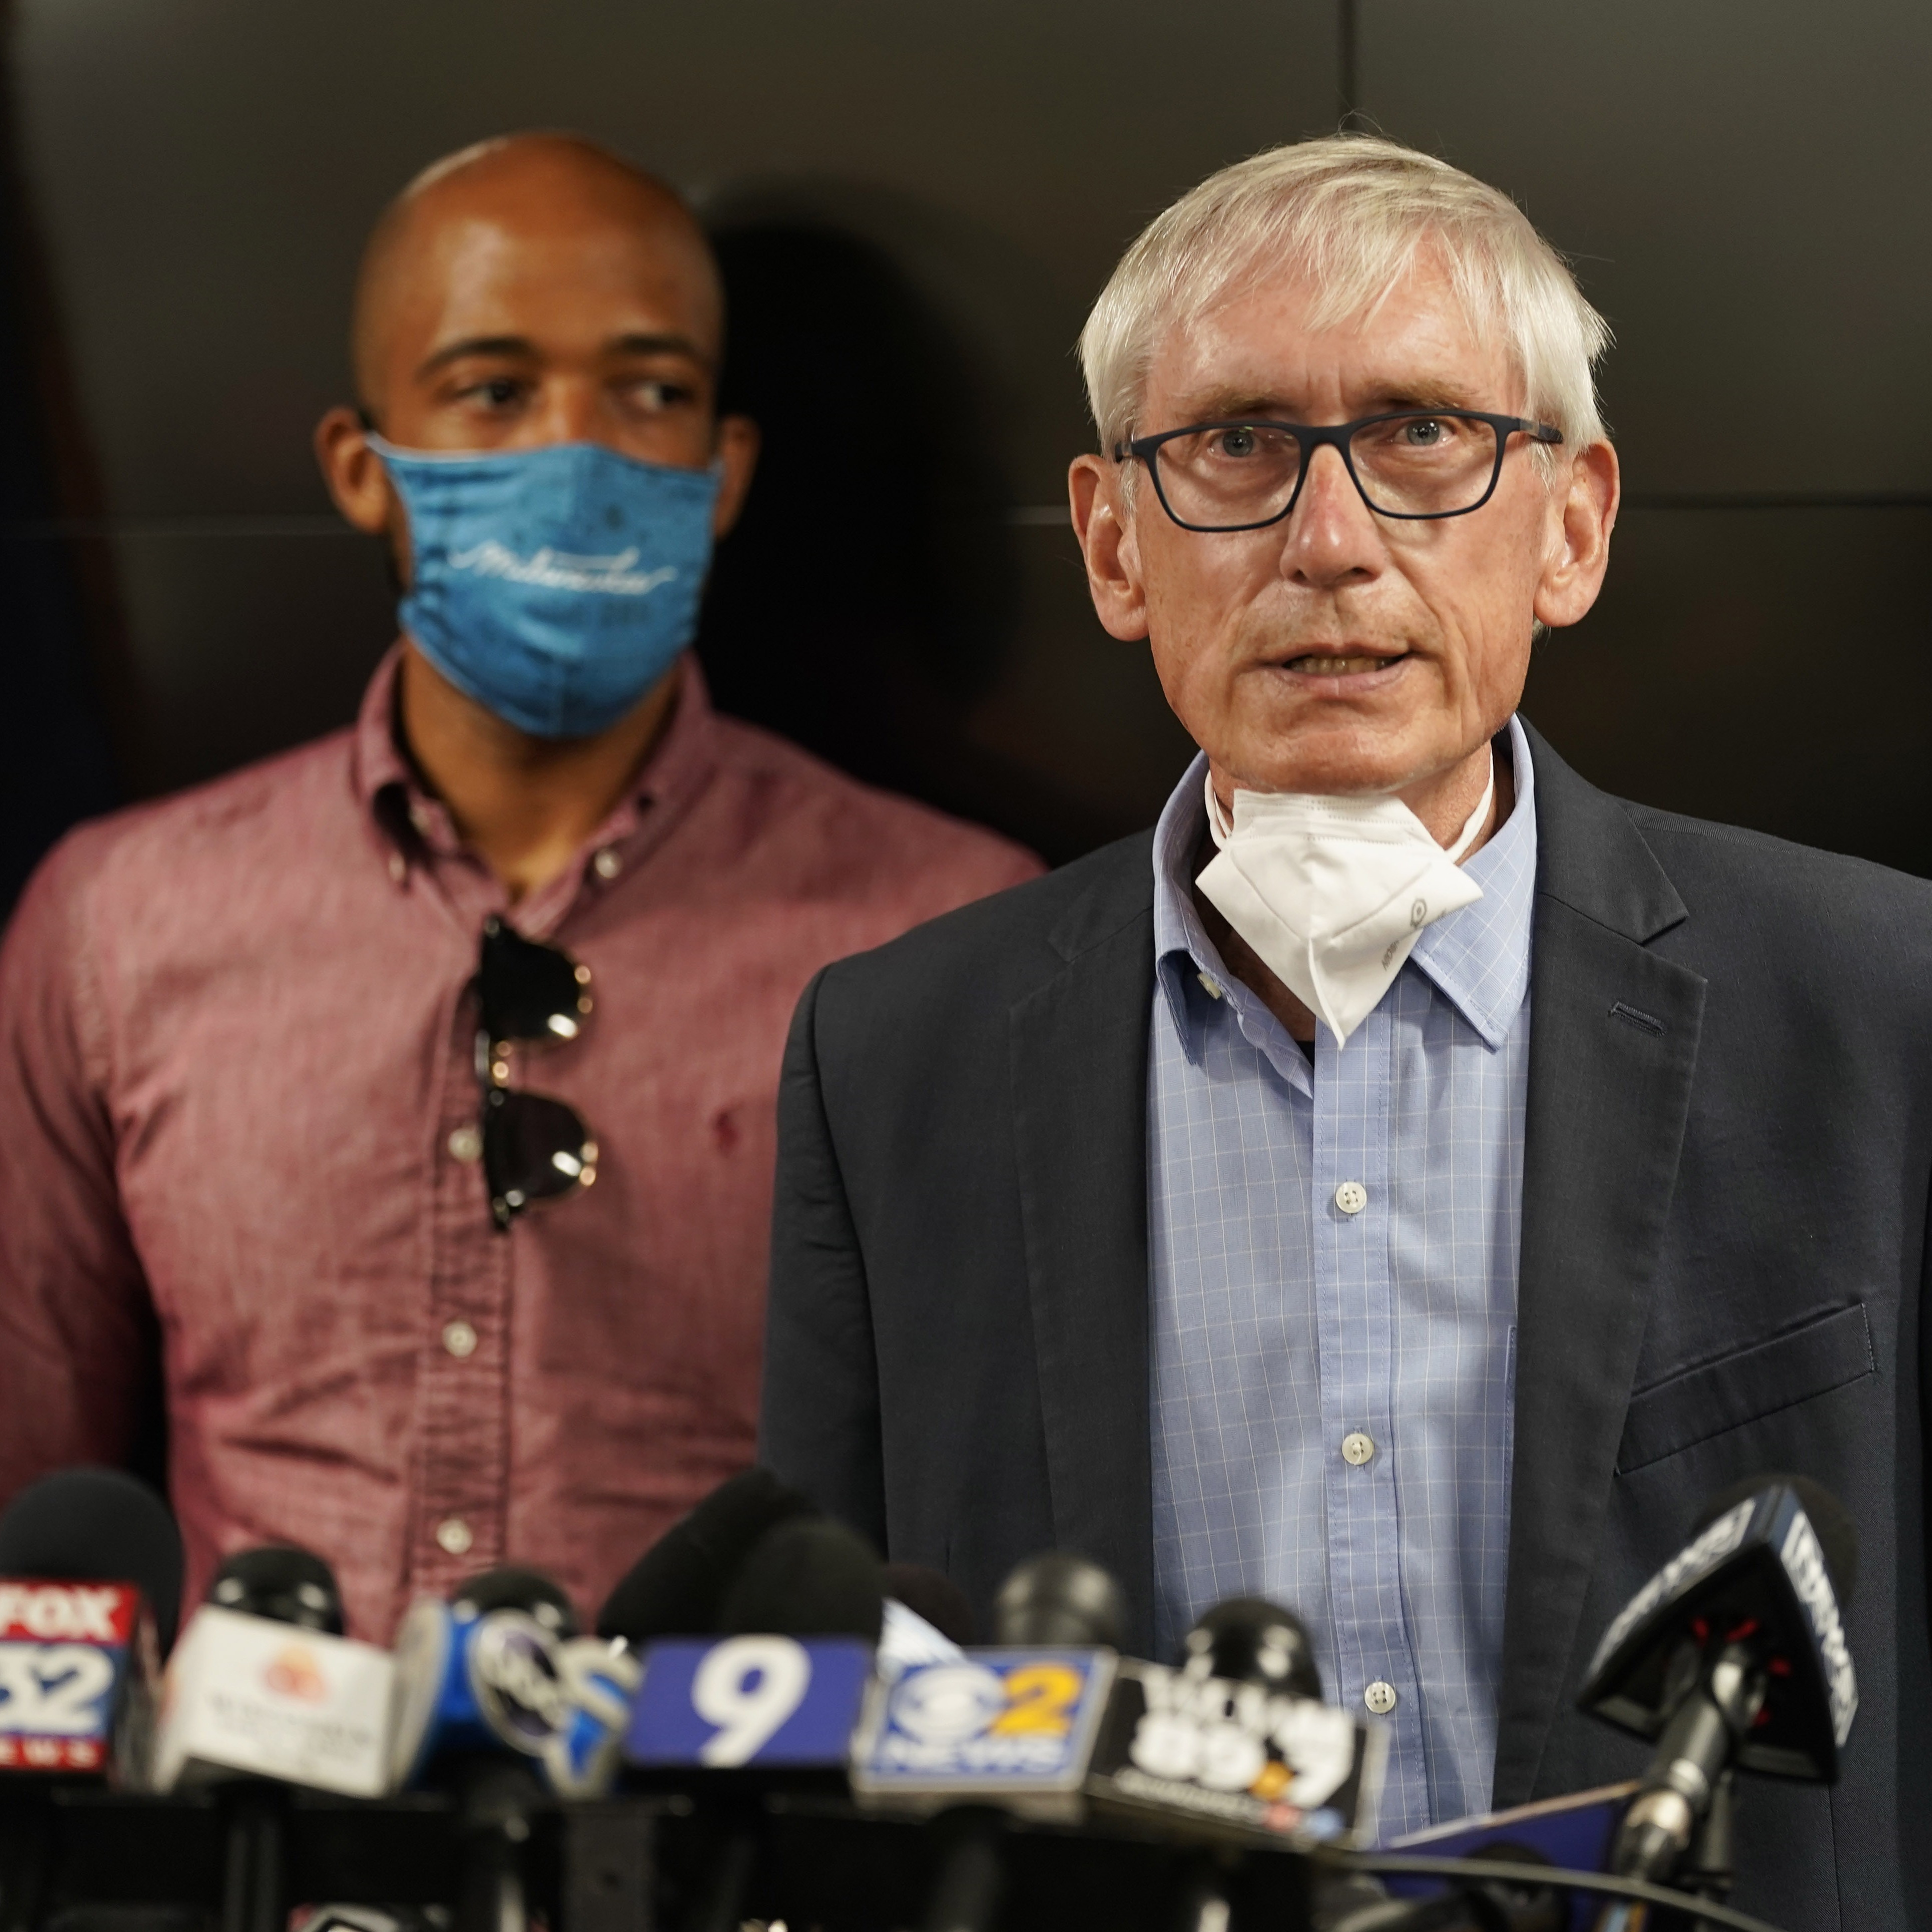 Wisconsin Gov. Tony Evers announced the National Guard would be deployed in anticipation of another round of unrest in Kenosha. Evers is seen during a press conference in August. CREDIT: Morry Gash/AP